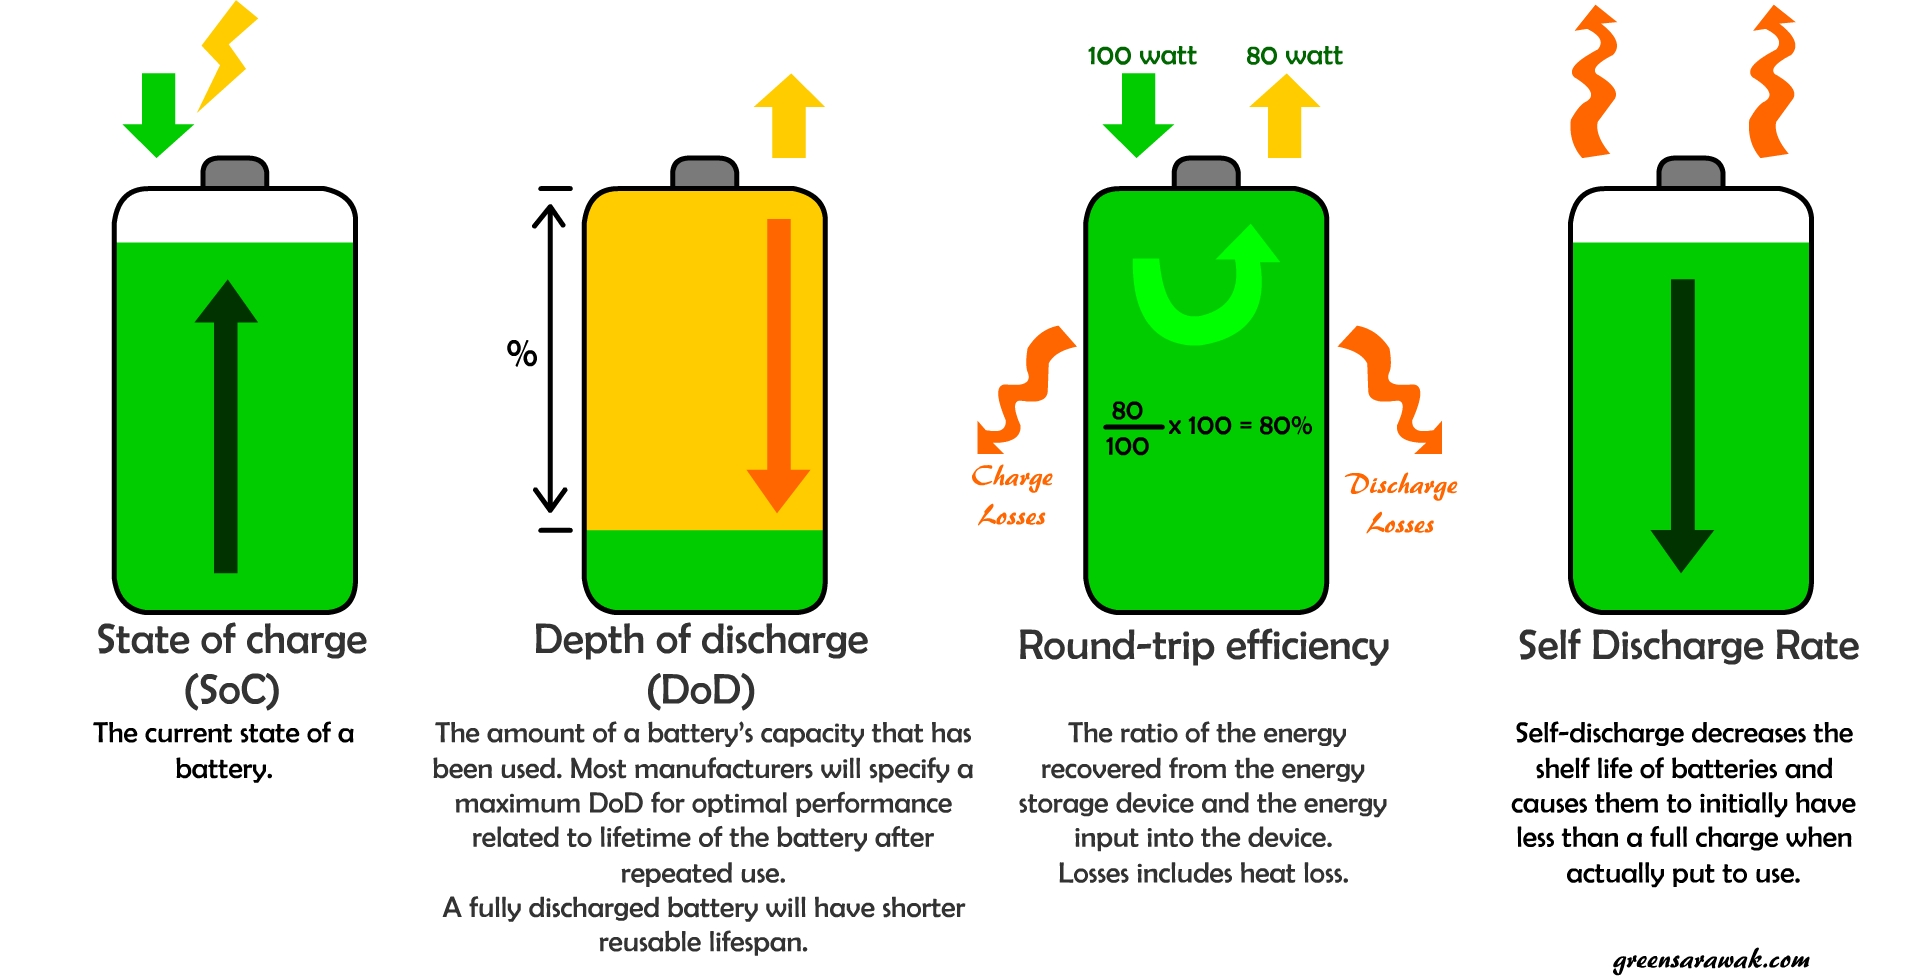 round trip efficiency of lithium ion batteries